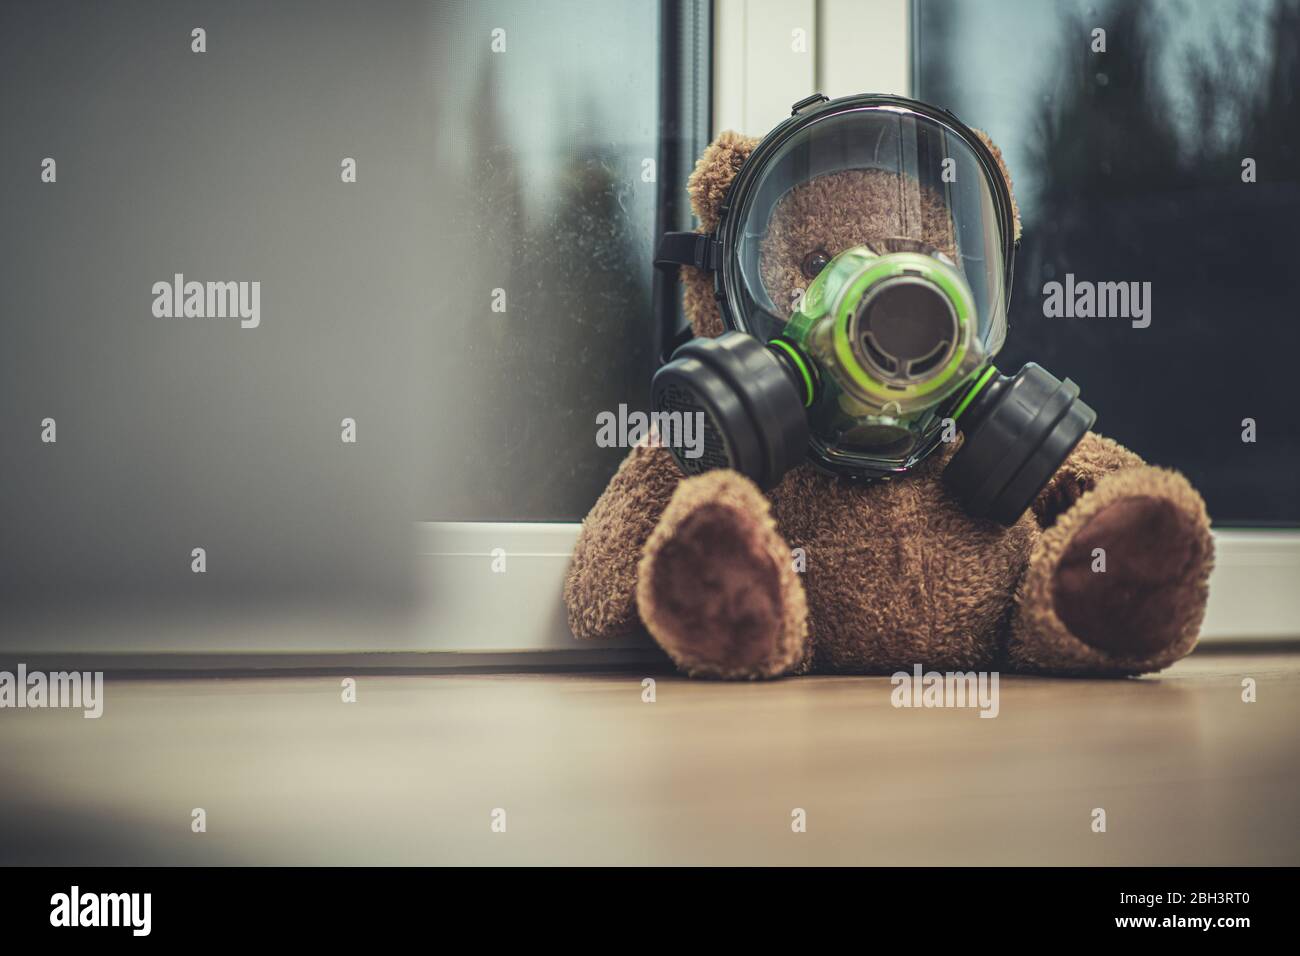 Close Up Of Child Toy Teddy Bear Wearing Respiratory Mask. Stock Photo